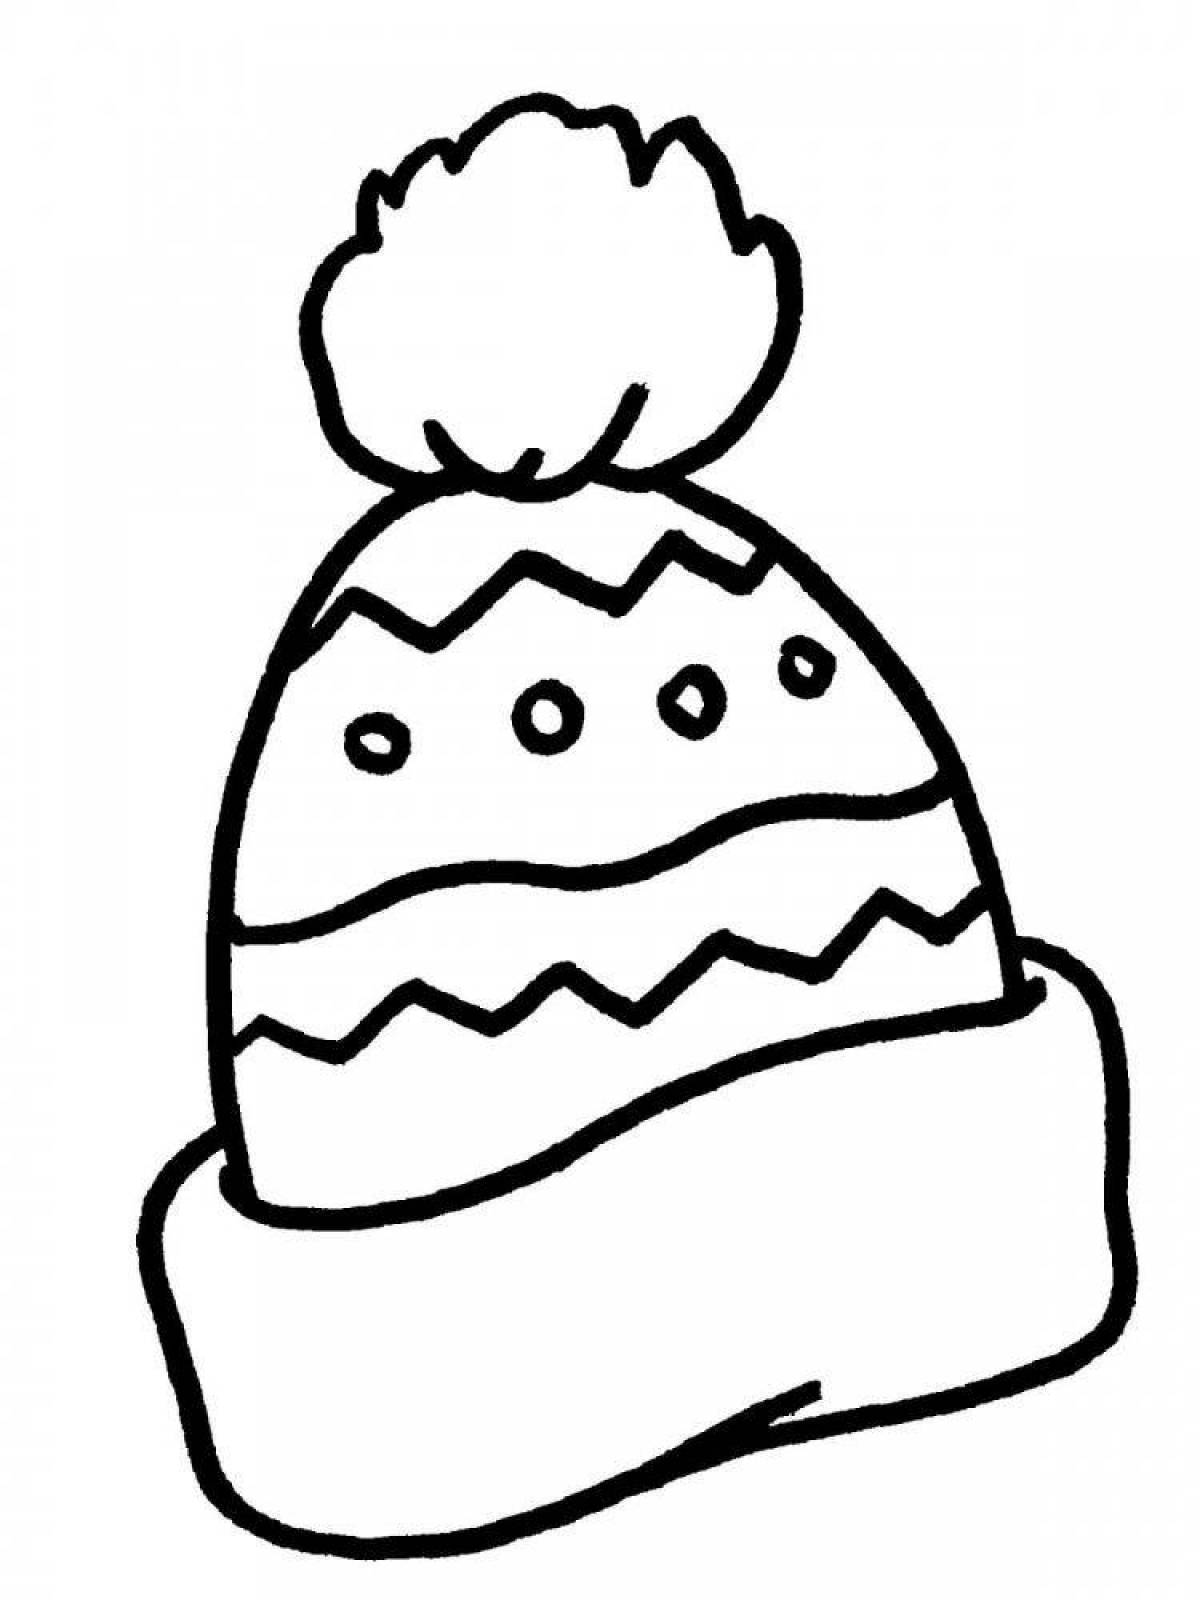 Happy hat coloring pages